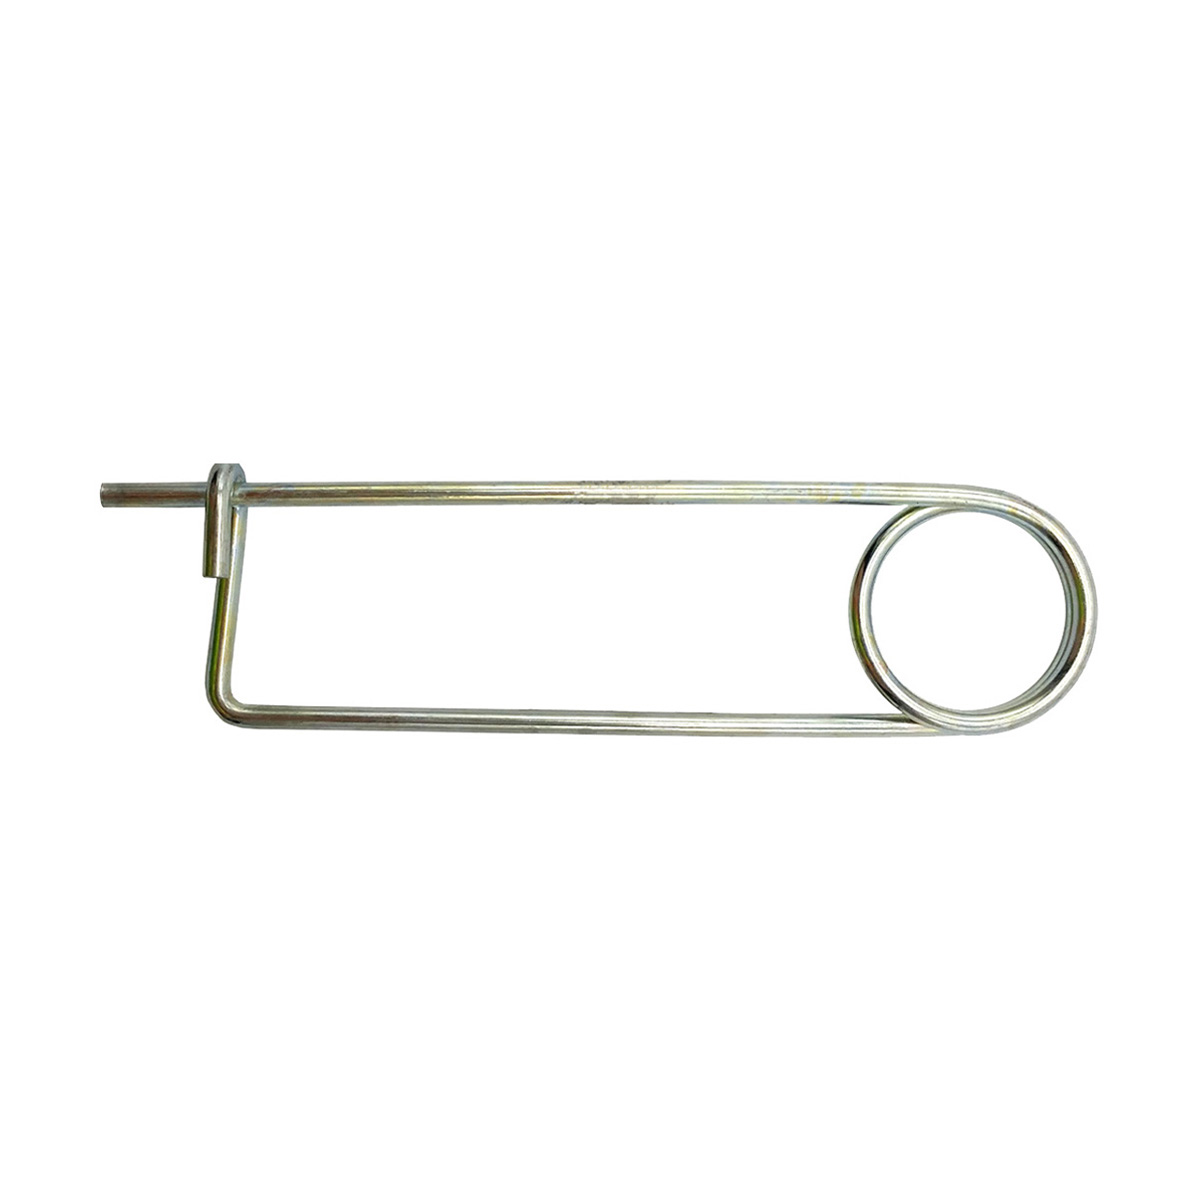 Safety Pin - 1/4-in - 5 Pack